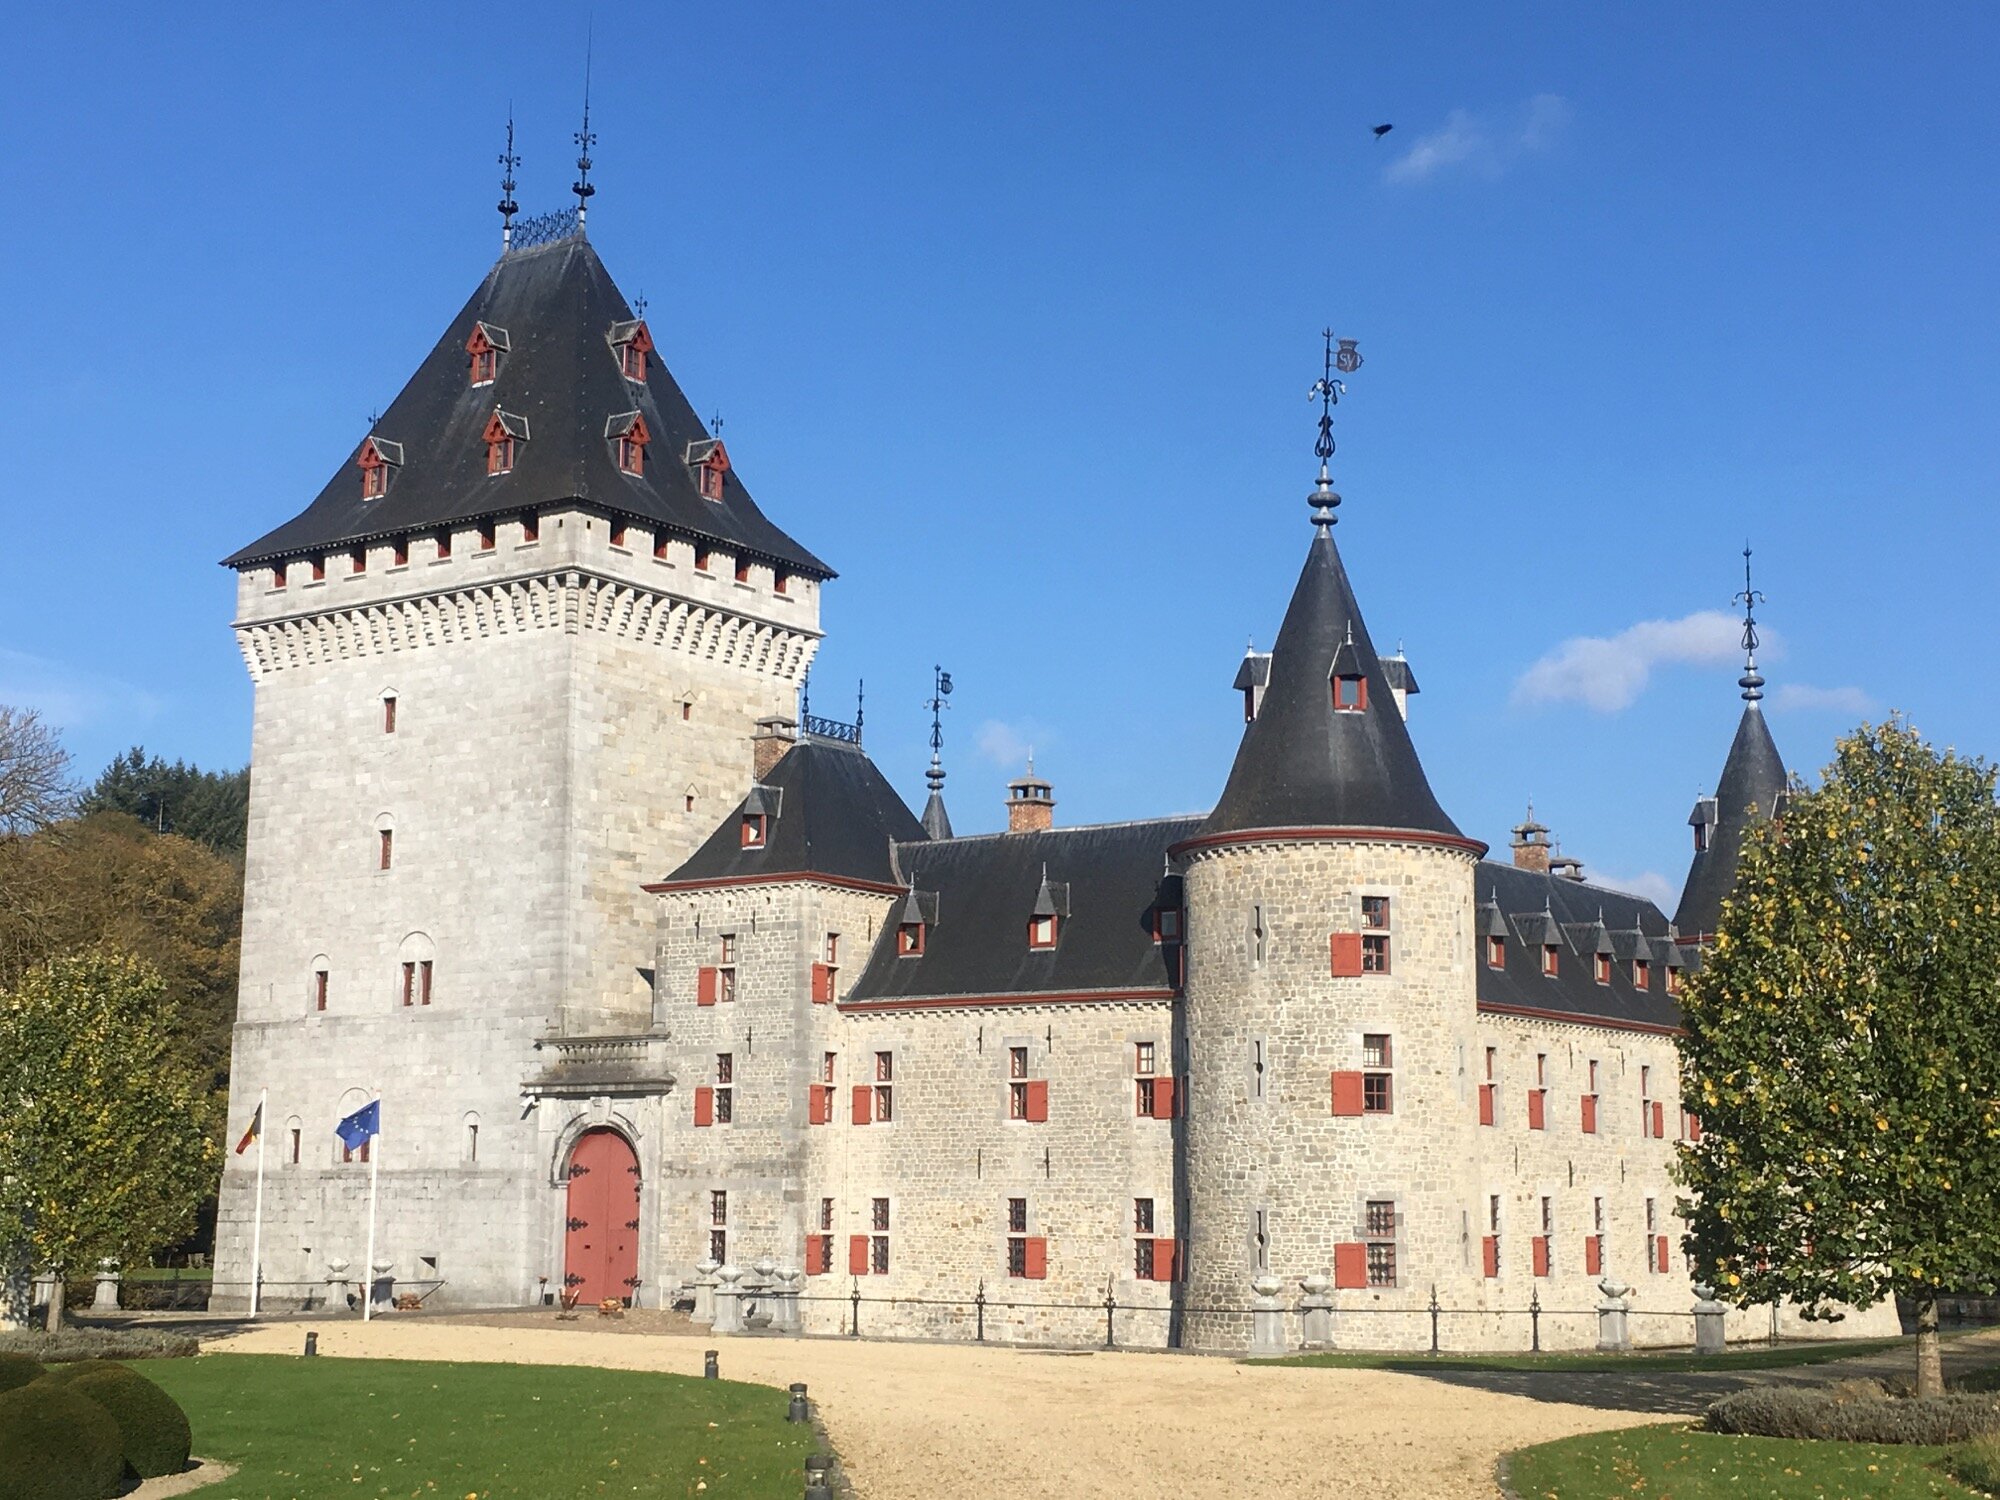 Your lodging might not be quite this nice… but at least you’ll be able to tour castles like this one! Photo taken in Belgium.